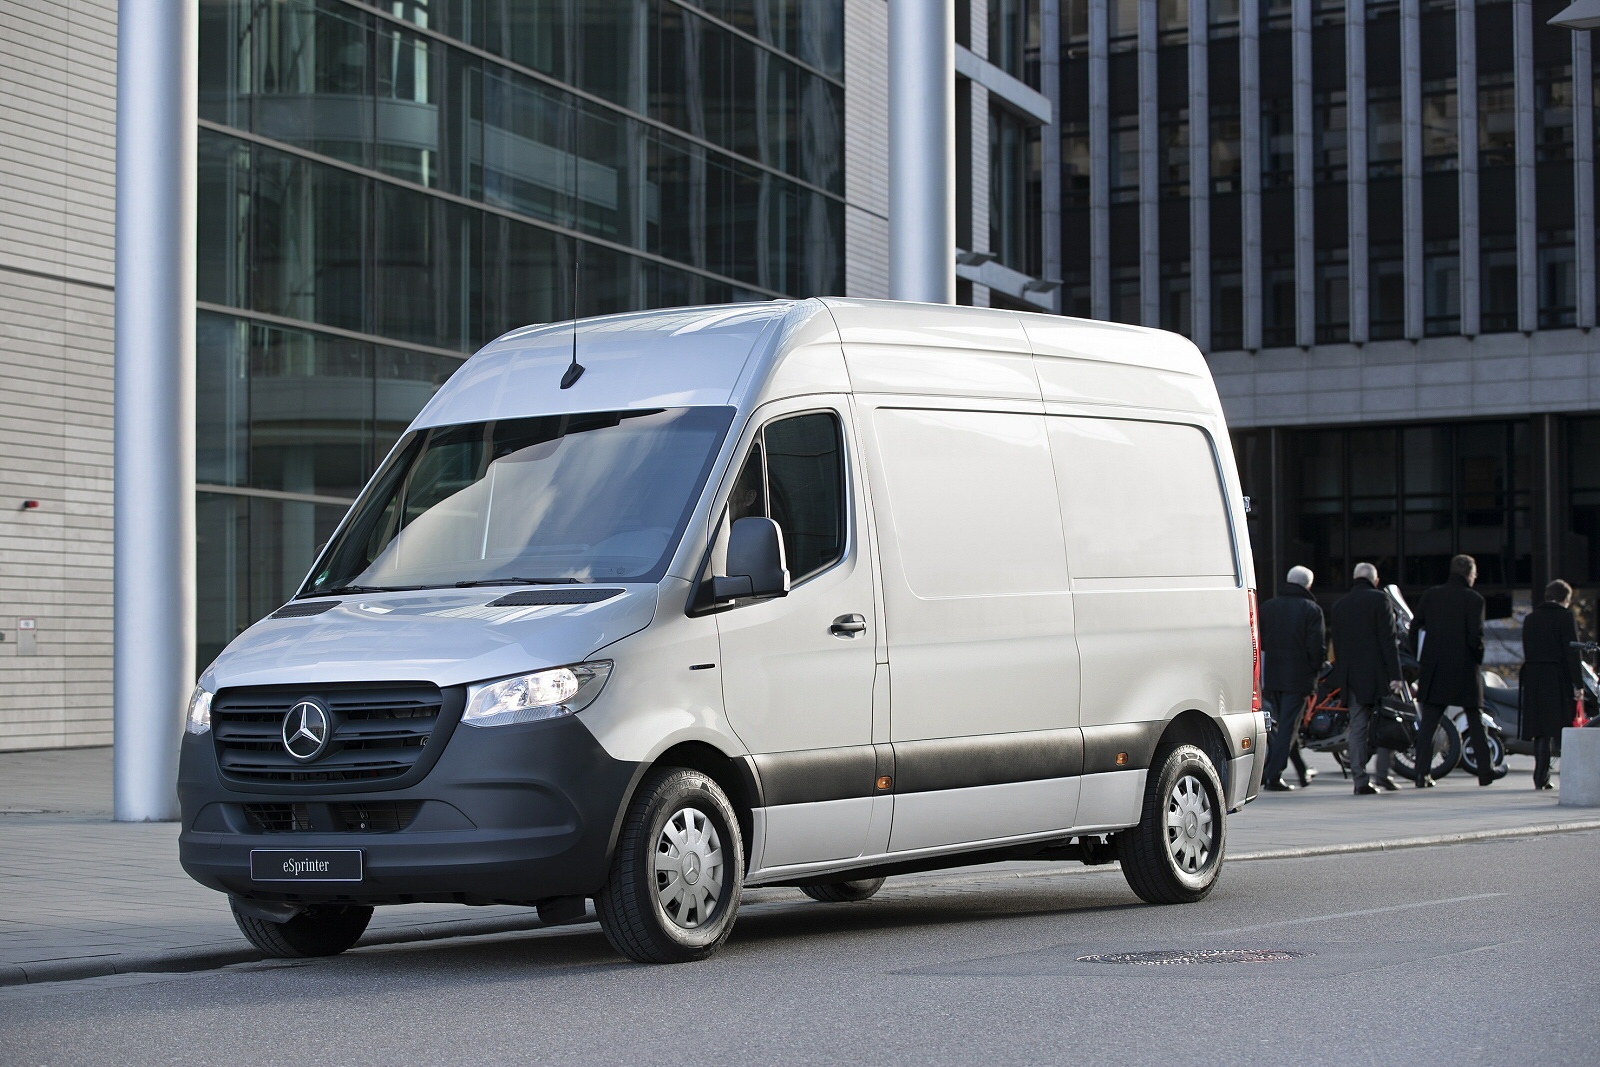 MERCEDES-BENZ SPRINTER Leasing & Contract Hire